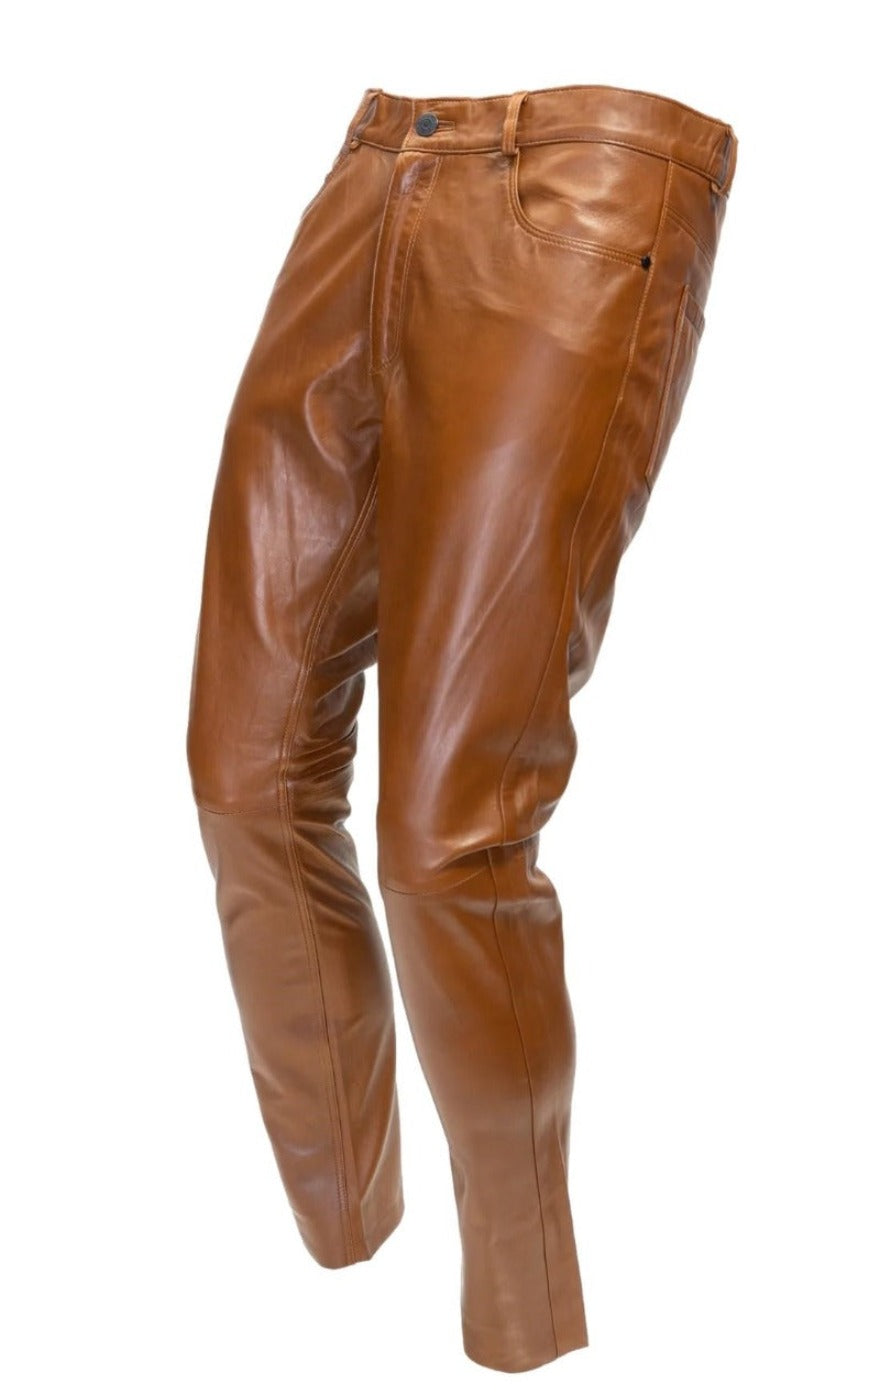 Photo of our Brown Leather Jeans, side view